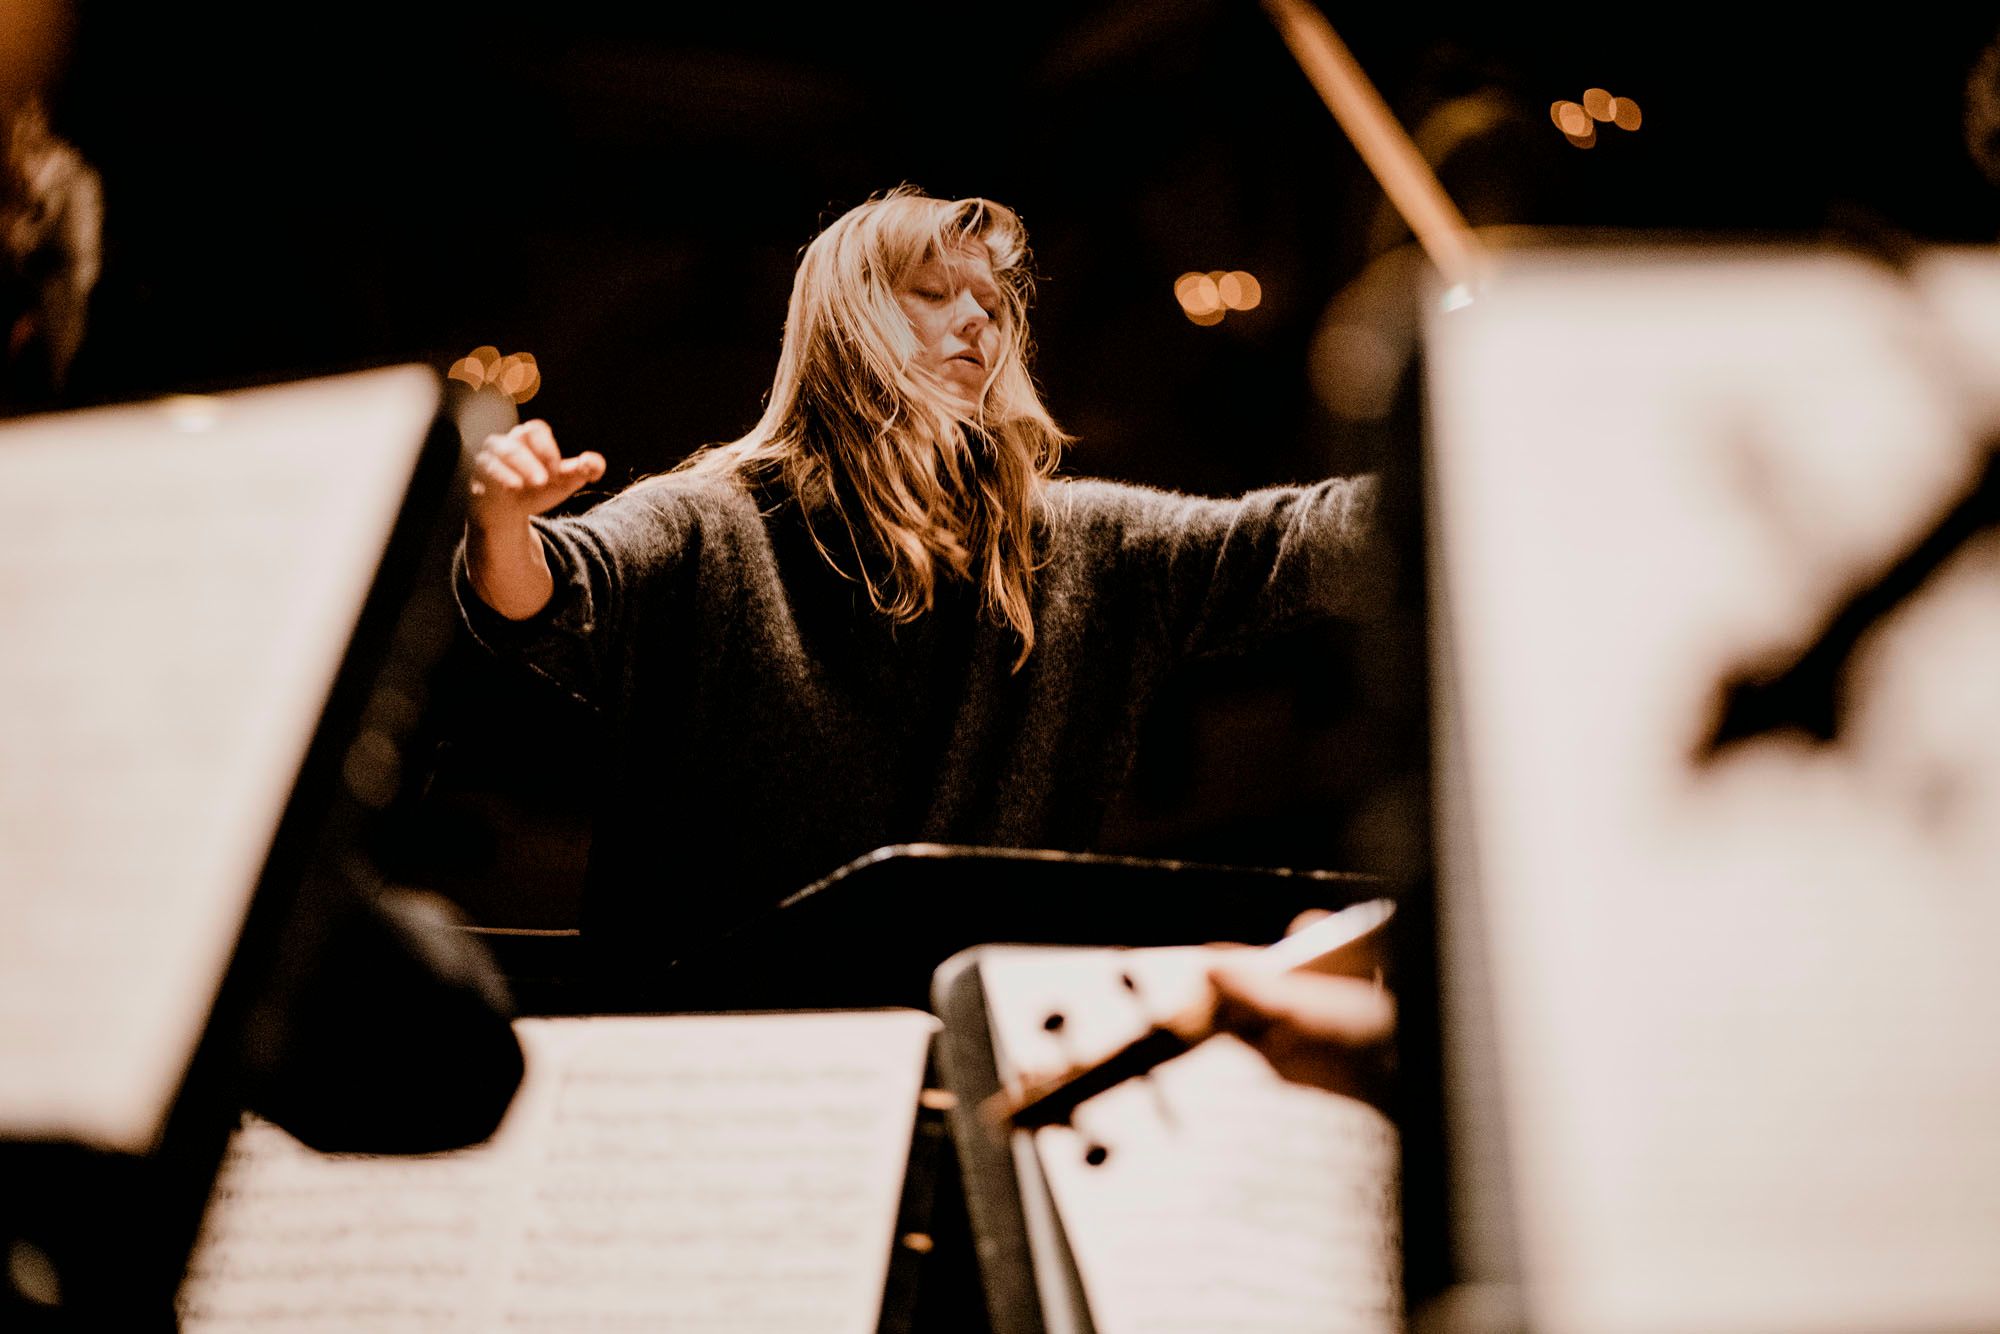 Bristol Beacon joins forces with London Symphony Orchestra to bring world-class symphonies to the masses this Spring